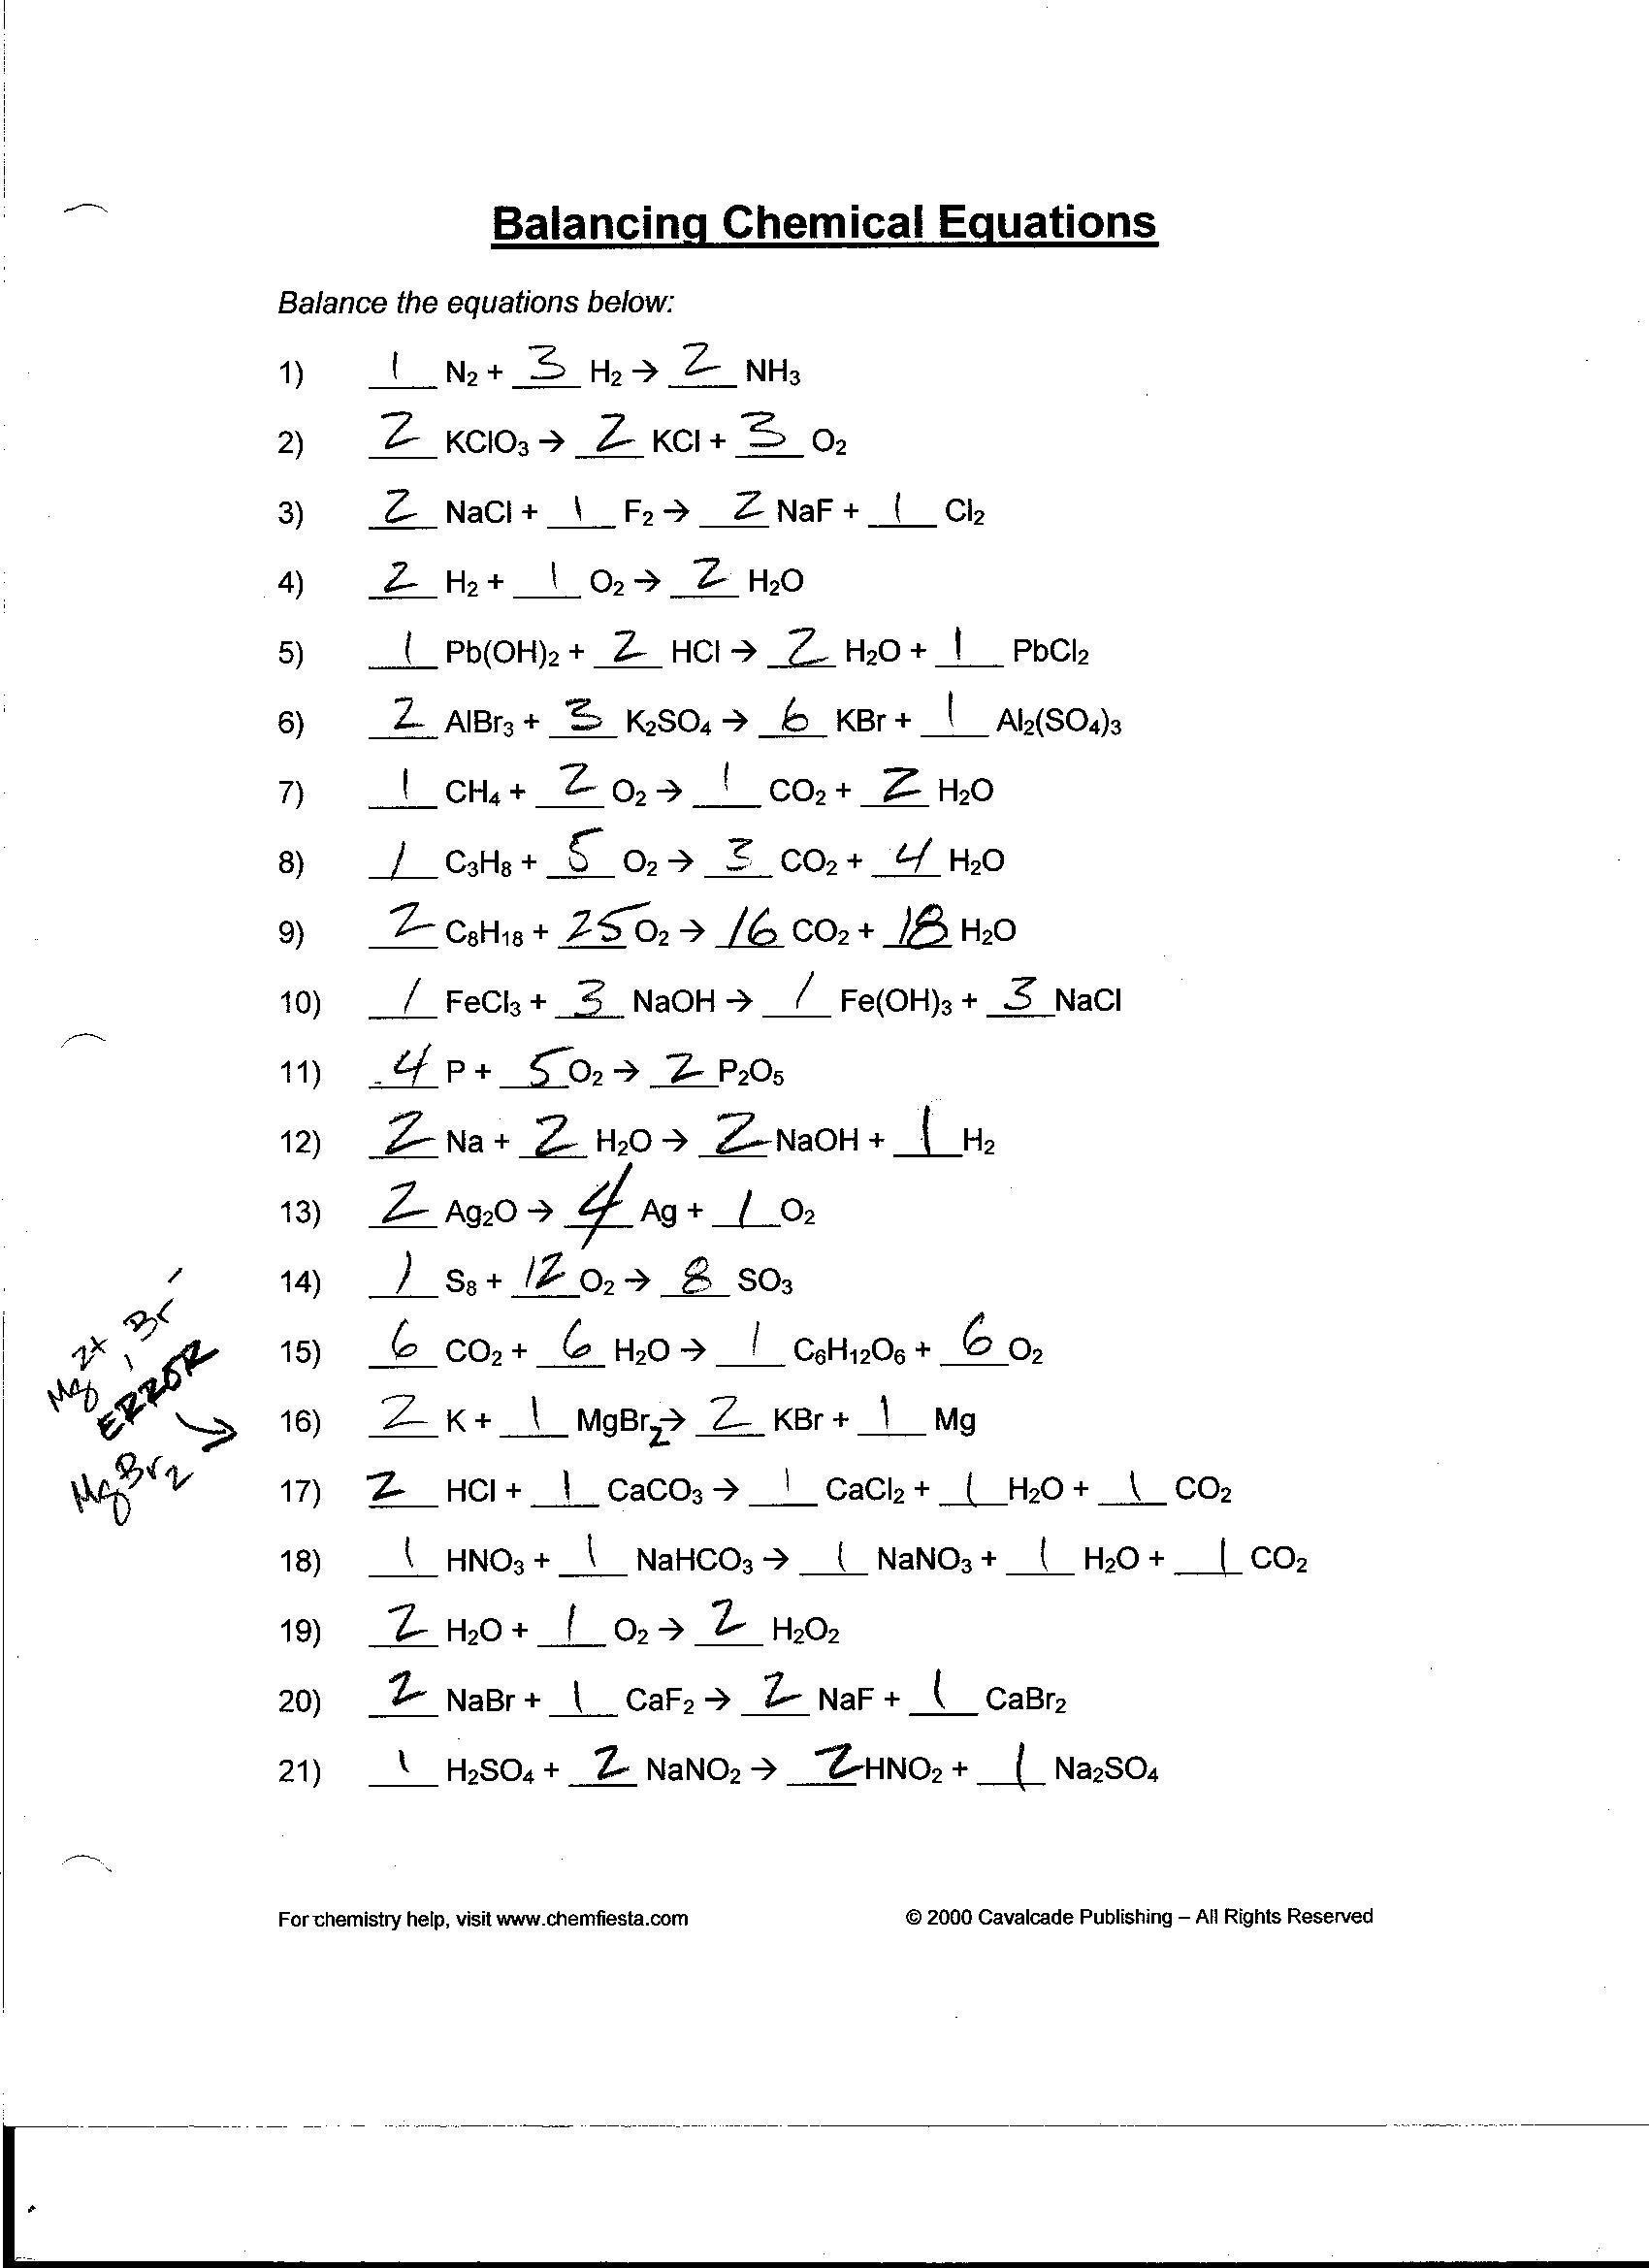 Chemistry Balancing Chemical Equations Worksheet Answer Key - Chemical